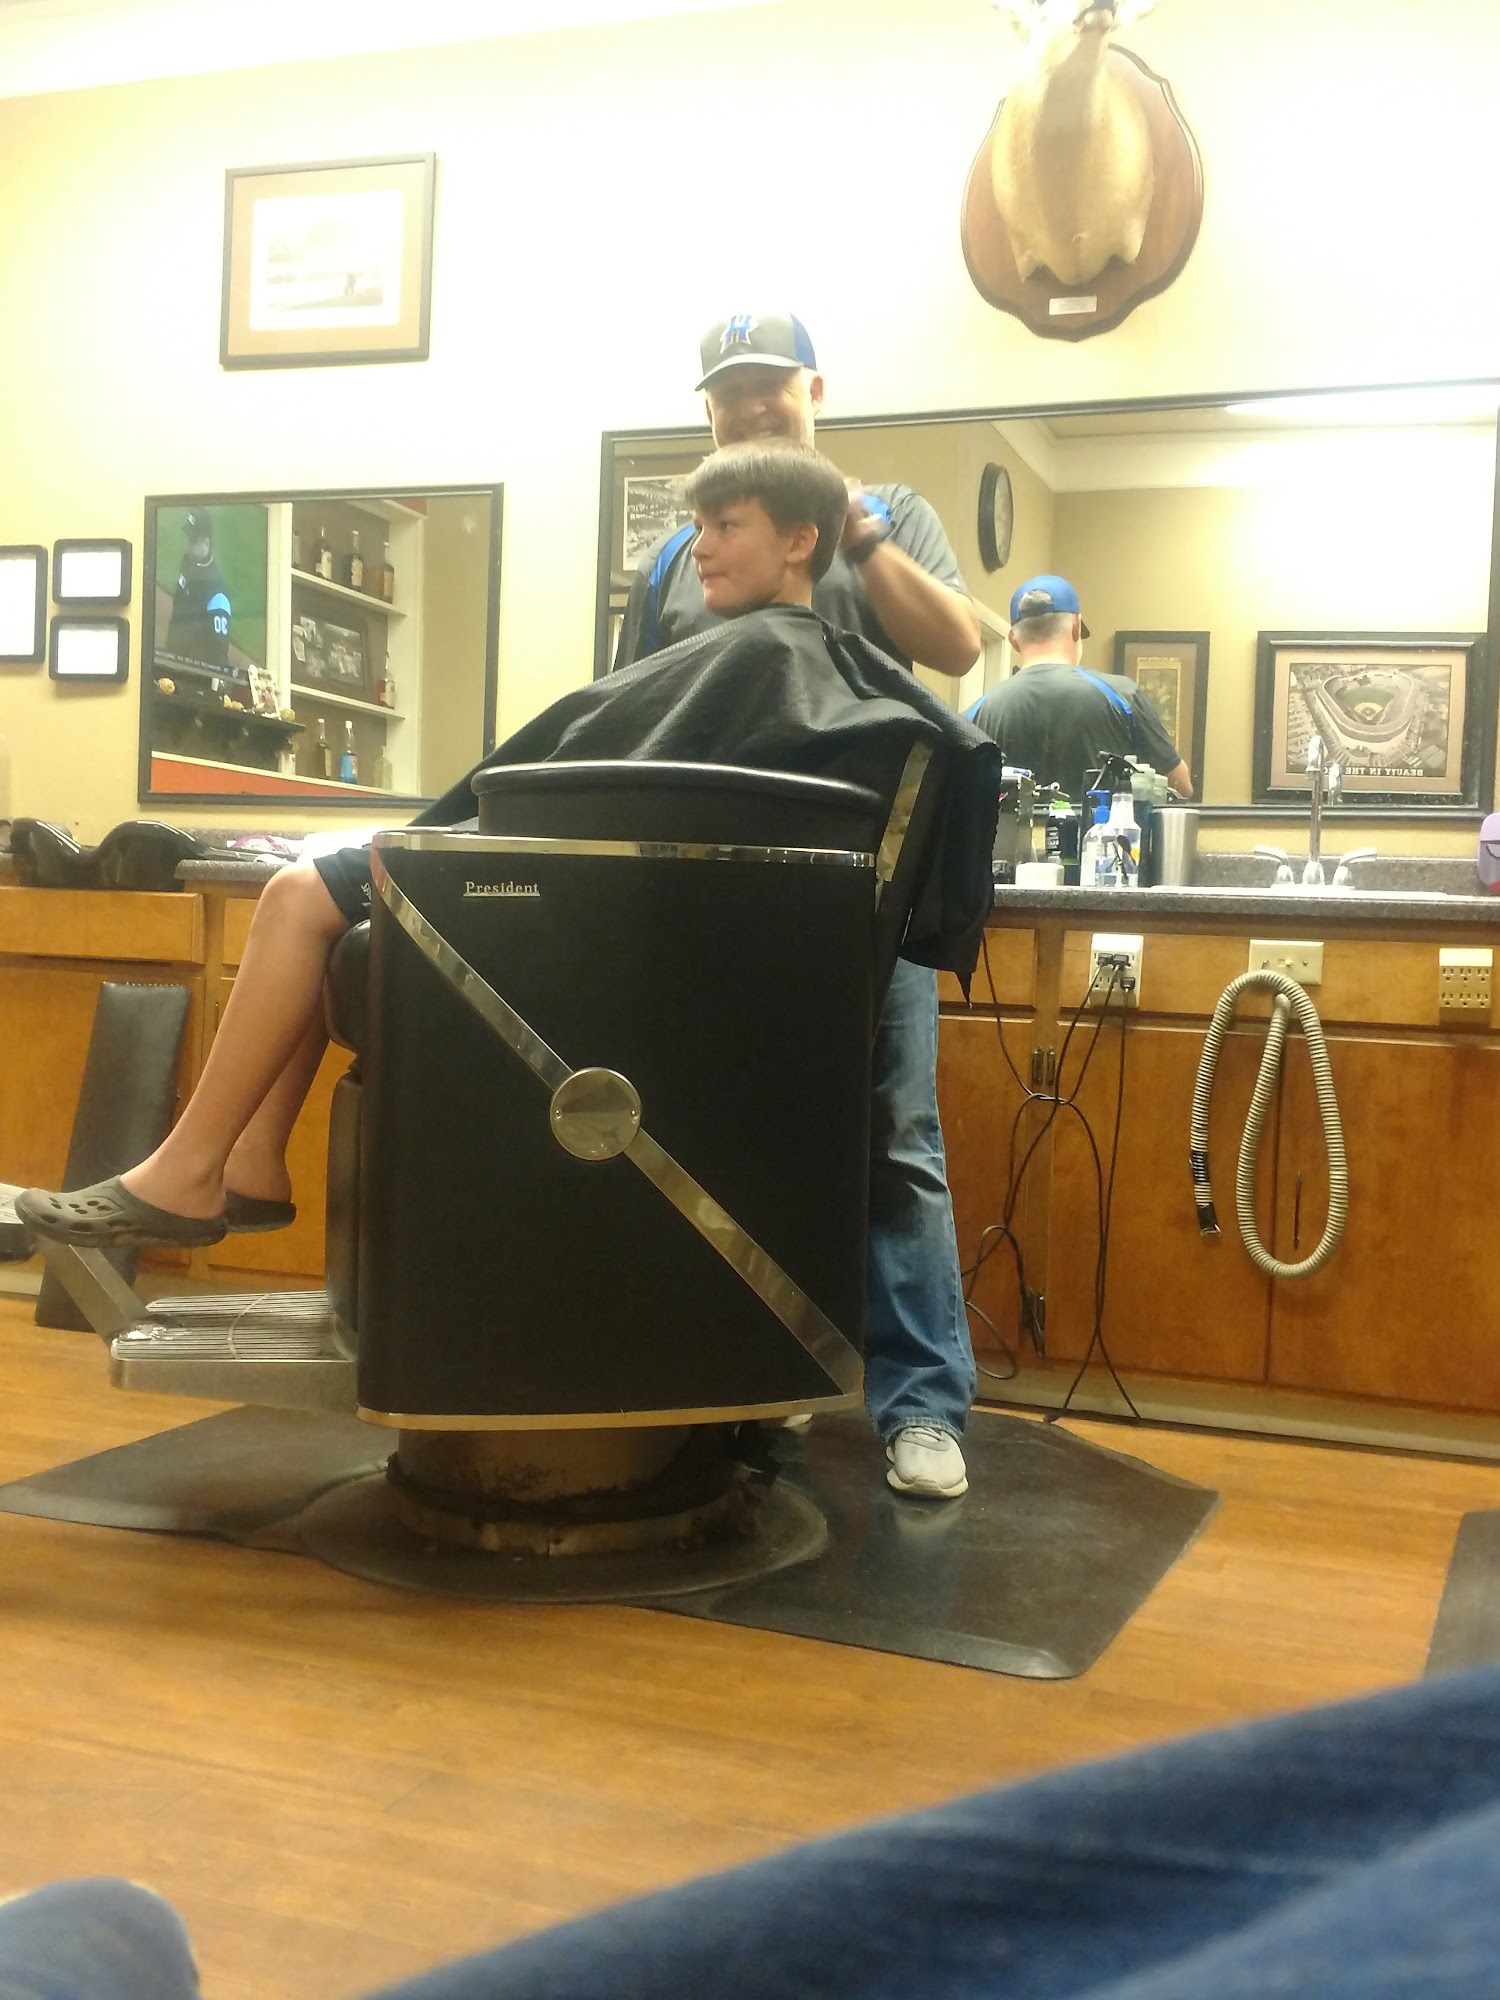 Darnall's Classic Barbershop Co. 111 E 2nd Ave, Huntingdon Tennessee 38344